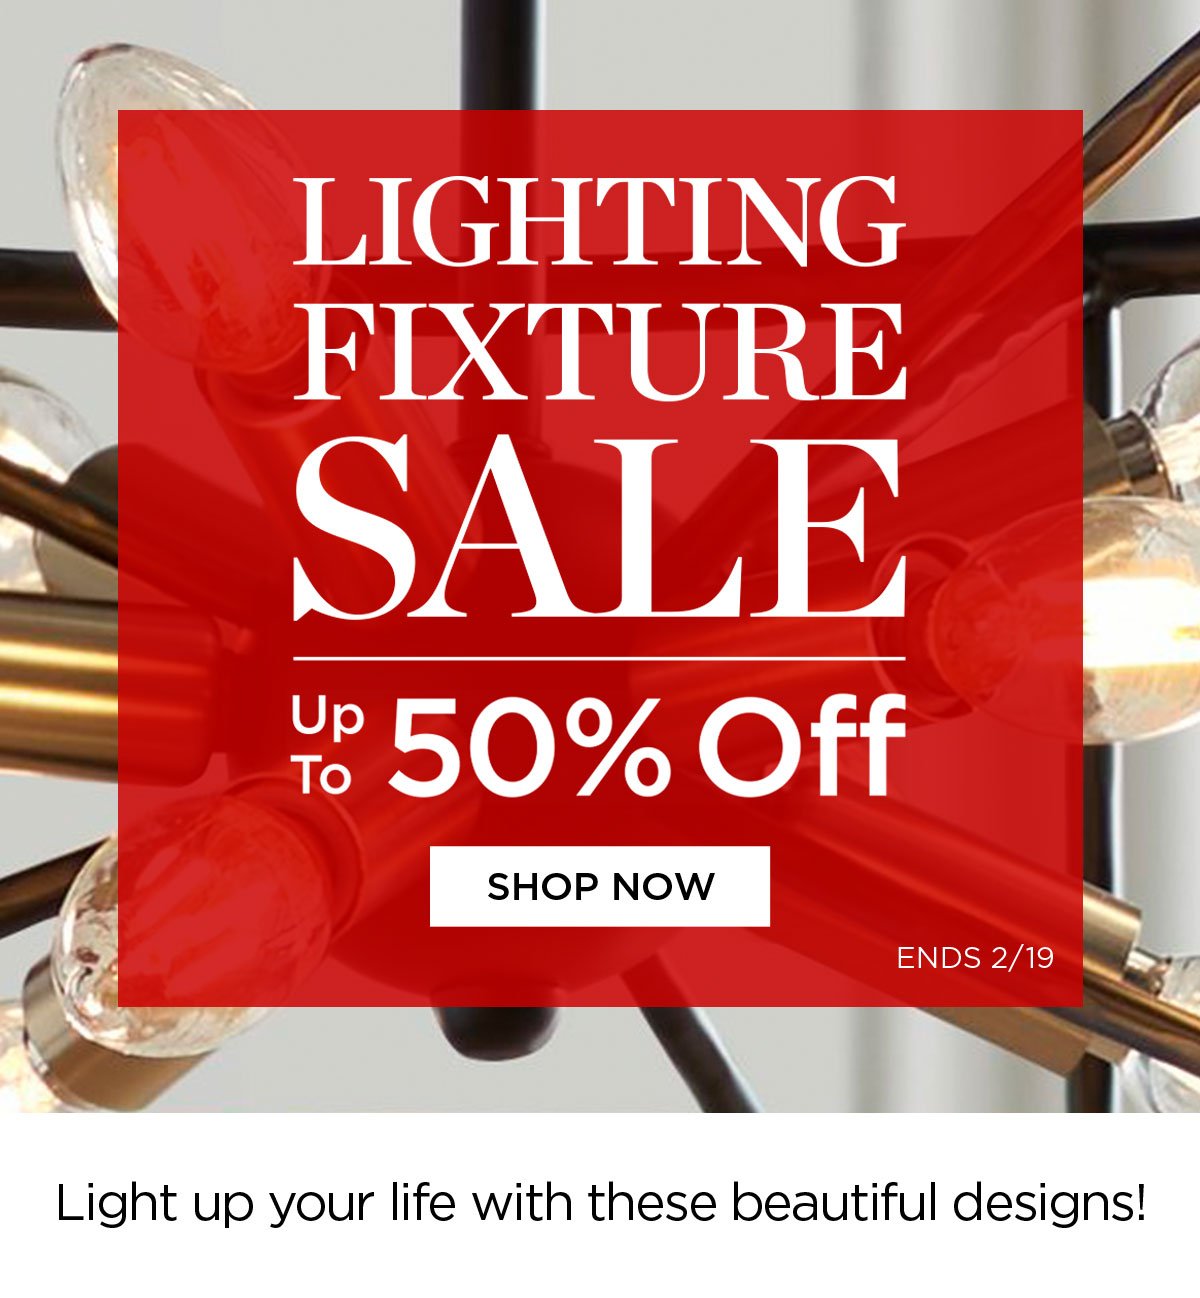 Lighting Fixture Sale Up to 50% Off - Shop Now - Ends 2/19 - Light up your life with these beautiful designs!